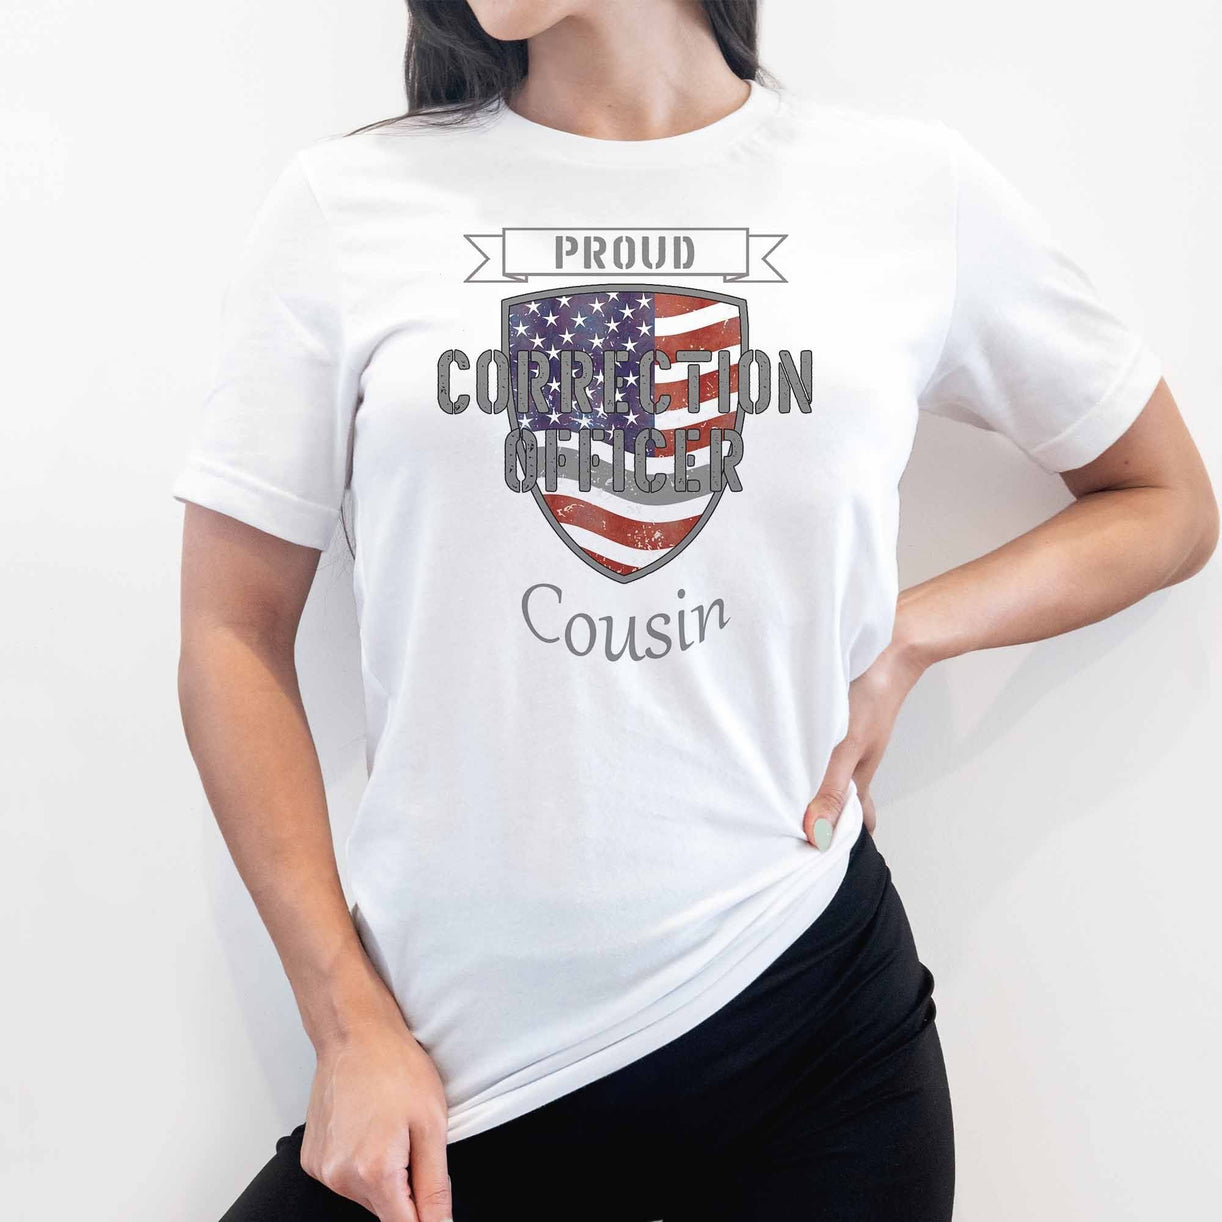 Proud Correction Officer Cousin - My Custom Tee Party